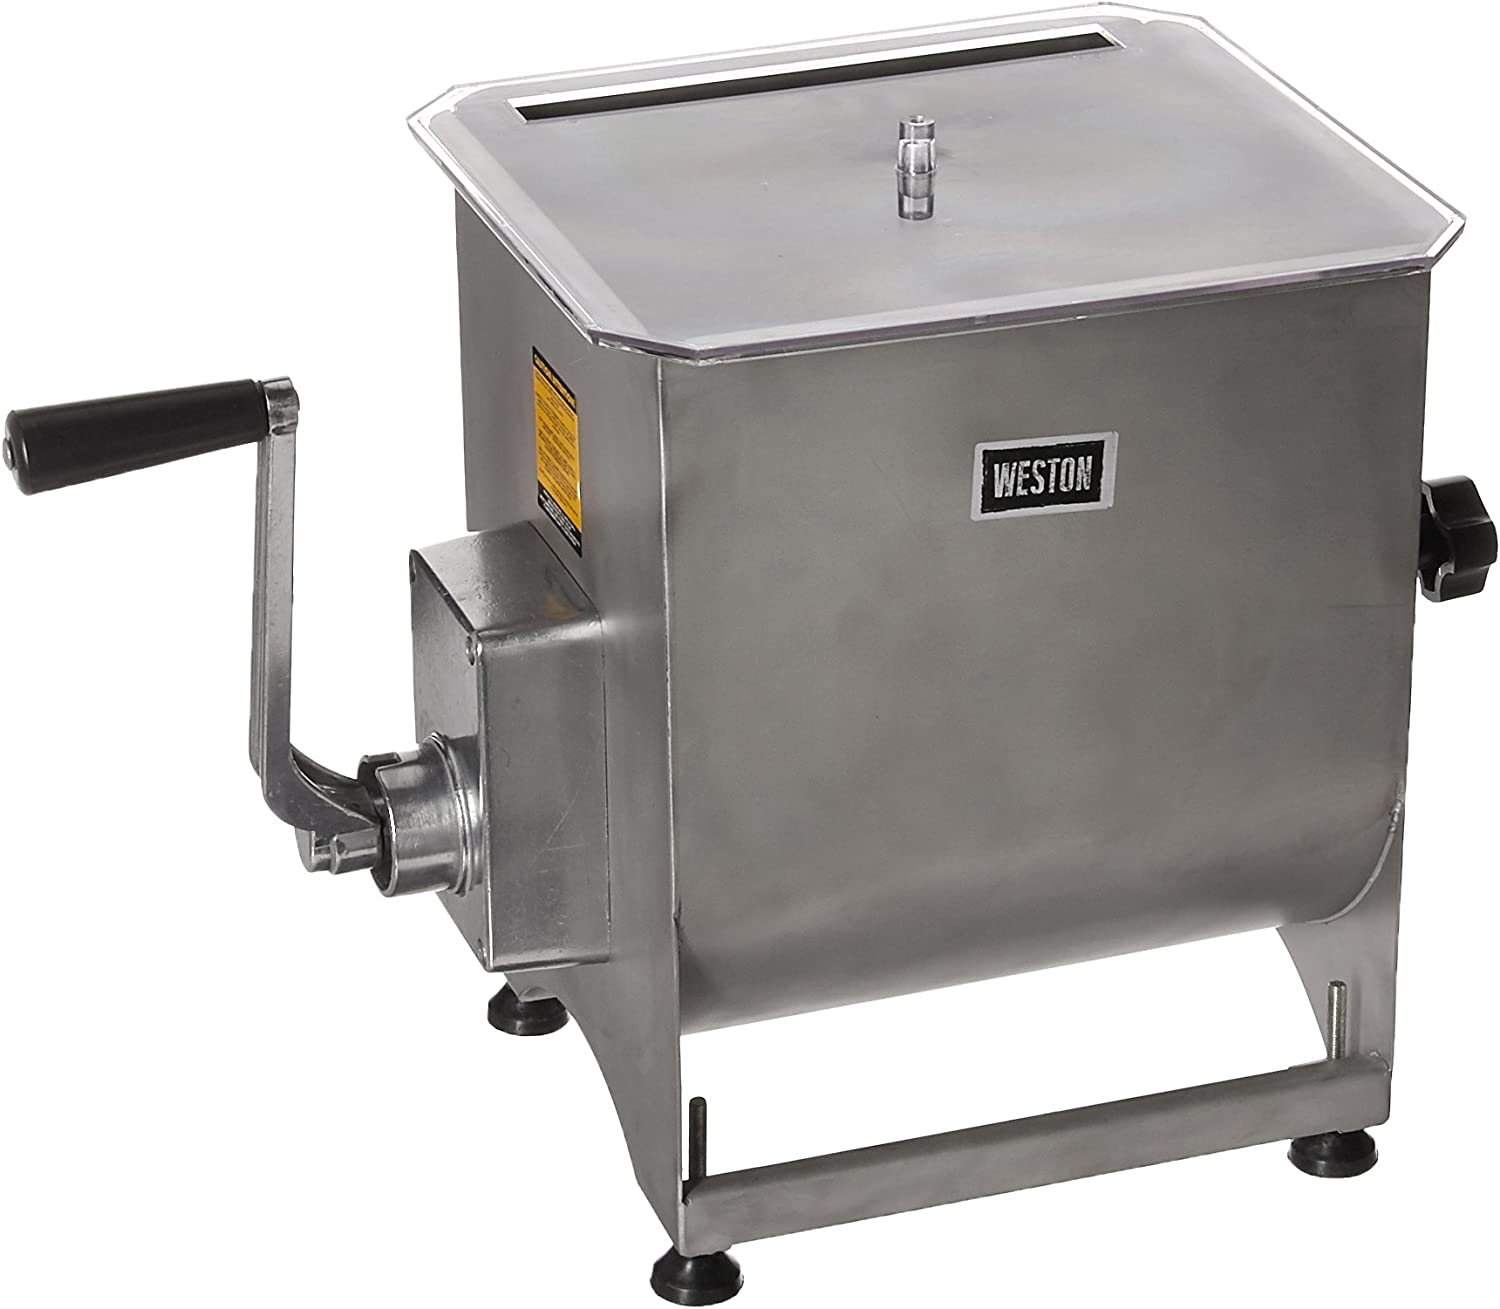 Weston Stainless Steel Meat Mixer, 22-Pound (36-1901) Import To Shop ×Product customization General Description Gallery Reviews